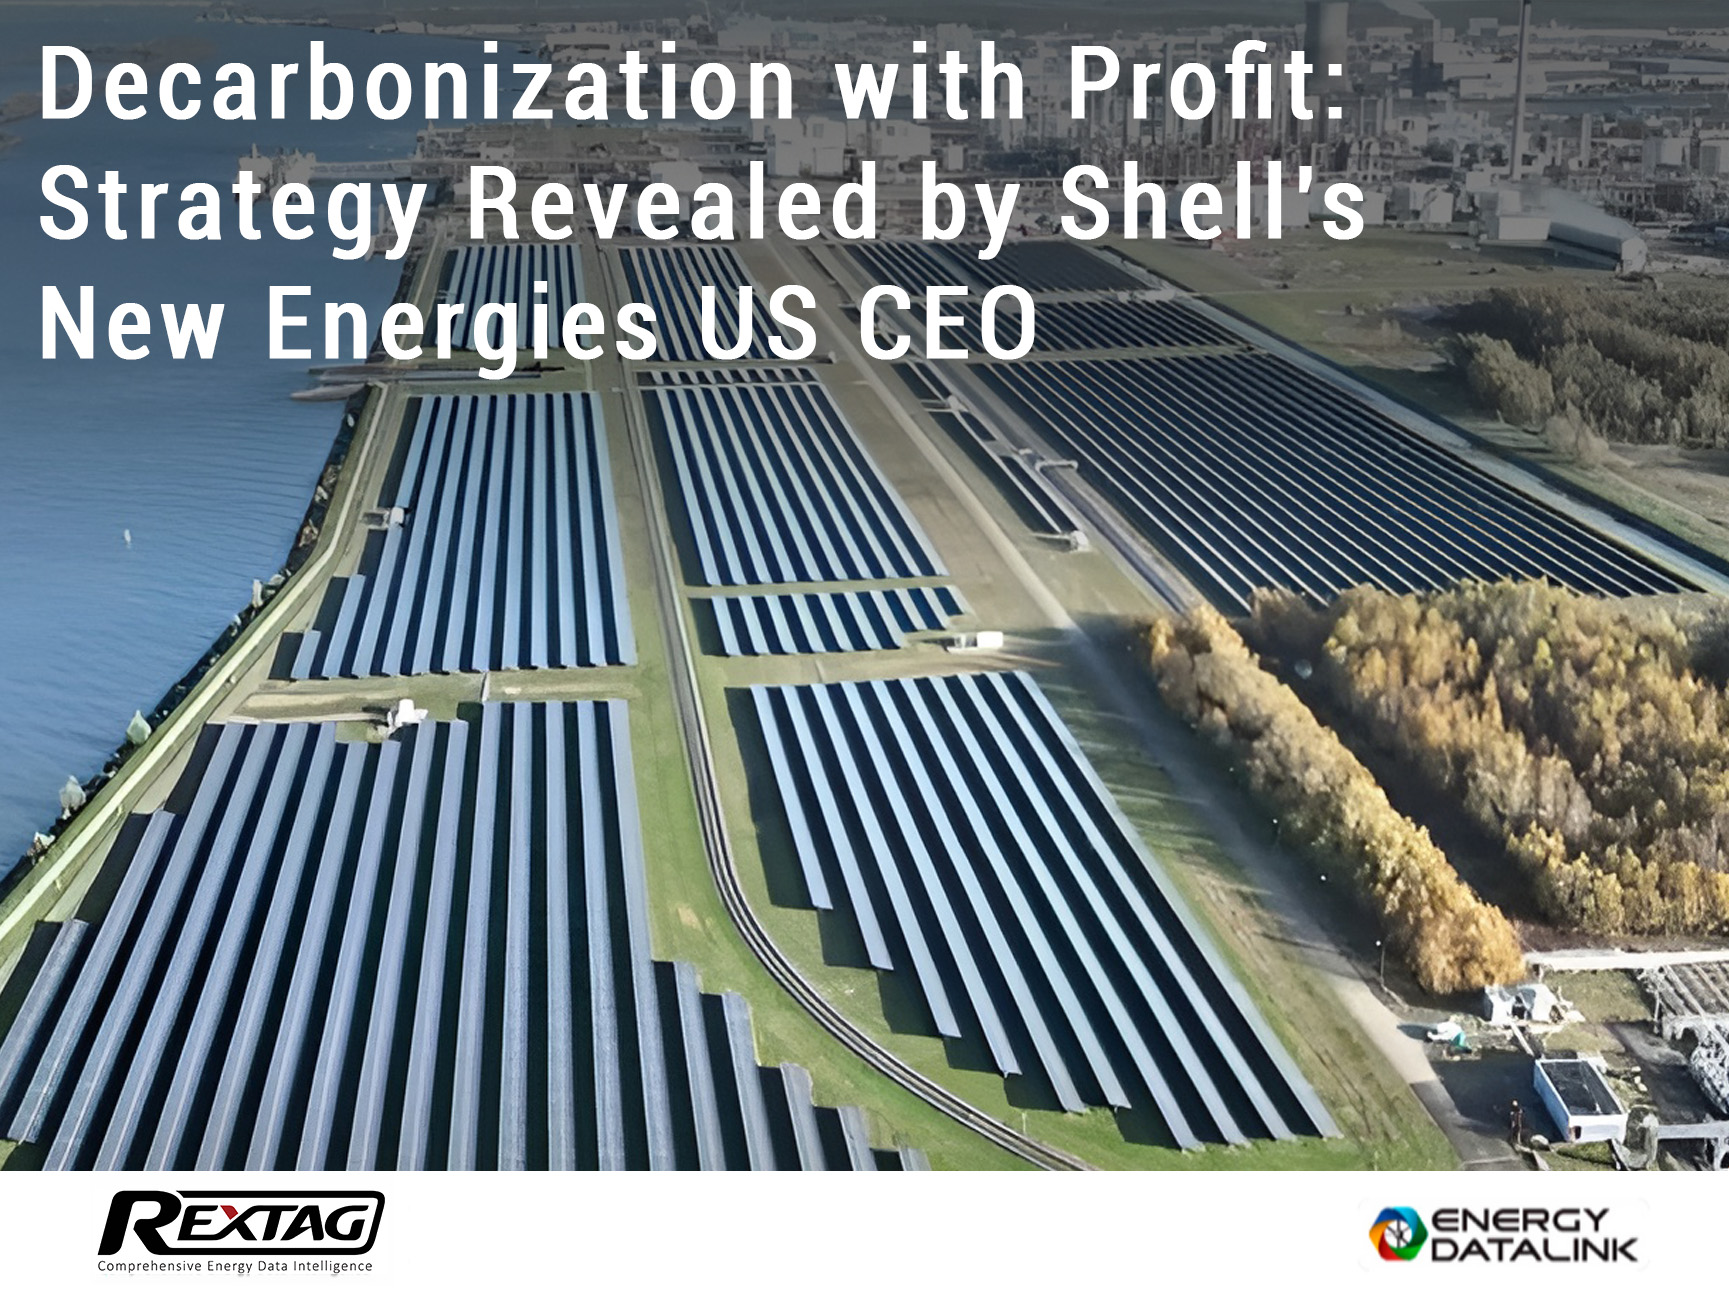 Decarbonization-with-Profit-Strategy-Revealed-by-Shell-s-New-Energies-US-CEO